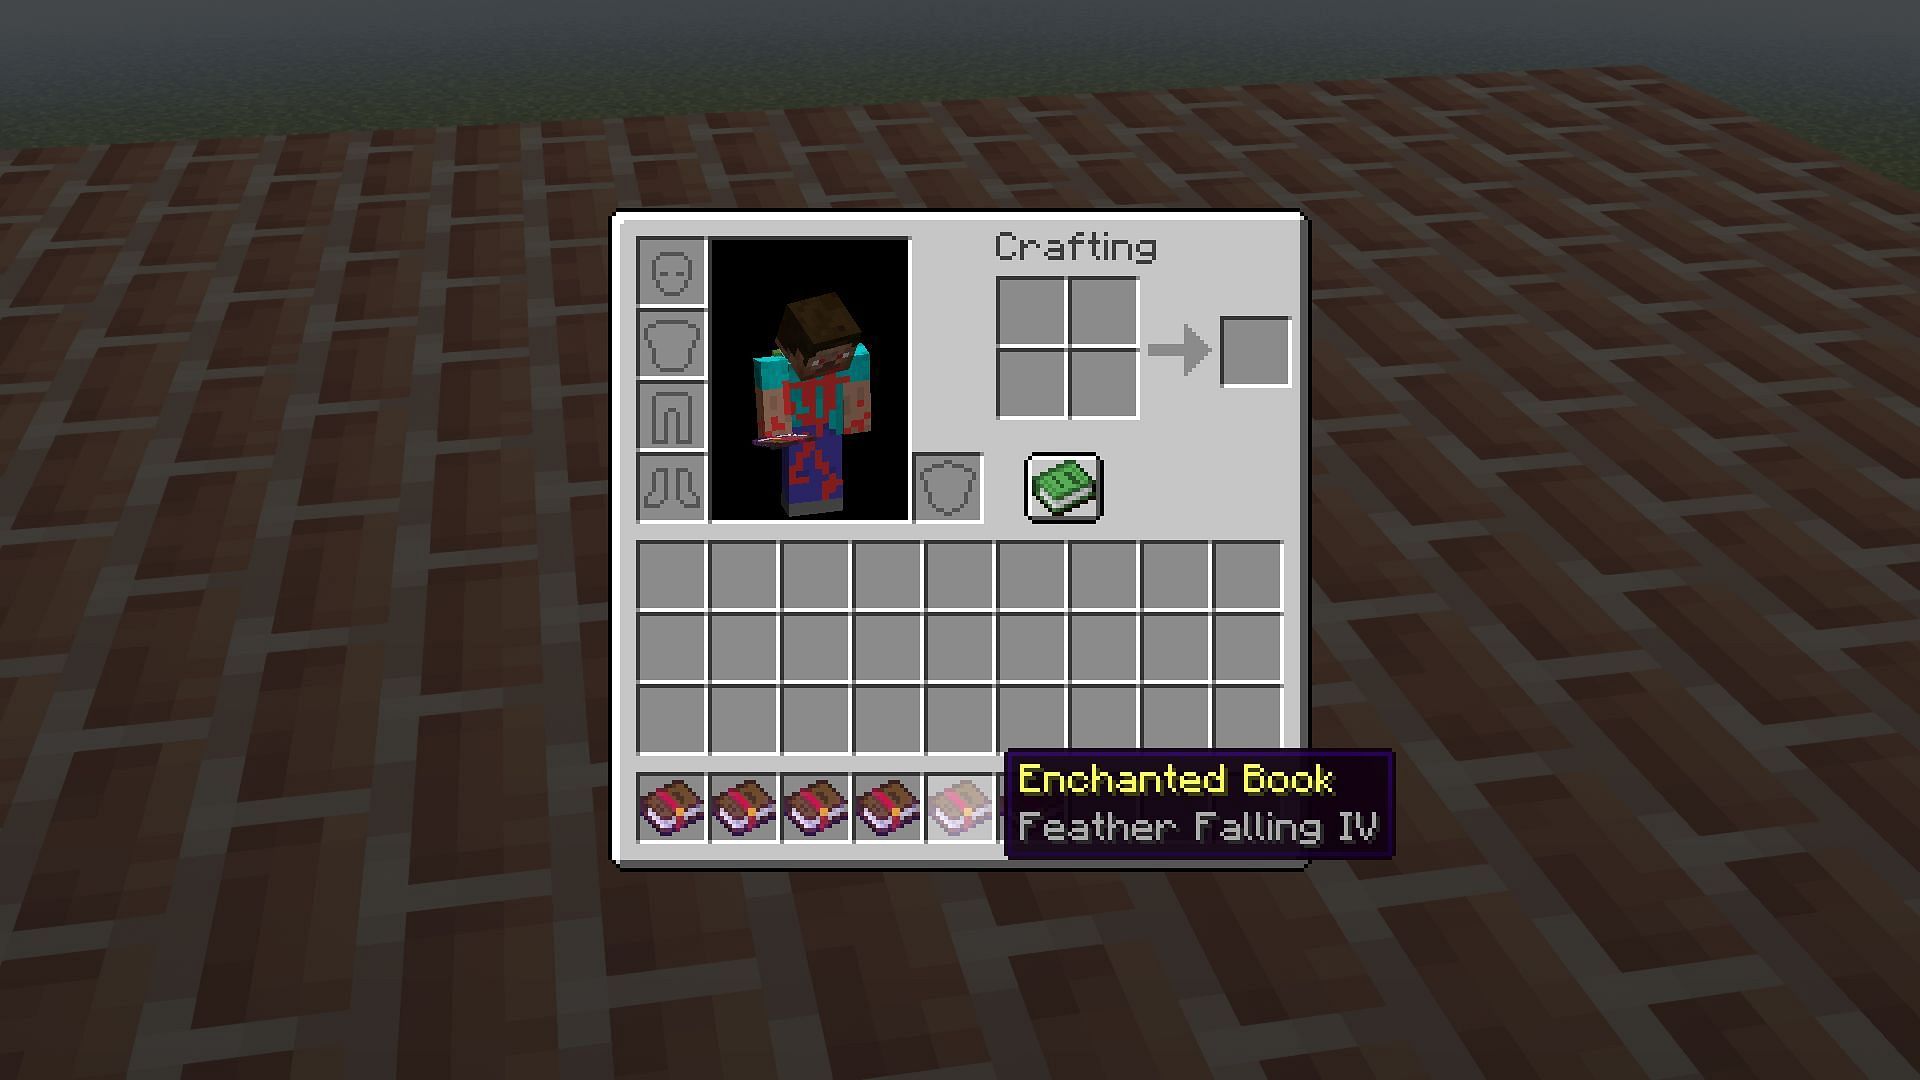 Feather falling enchantment in Minecraft (Image via Mojang)